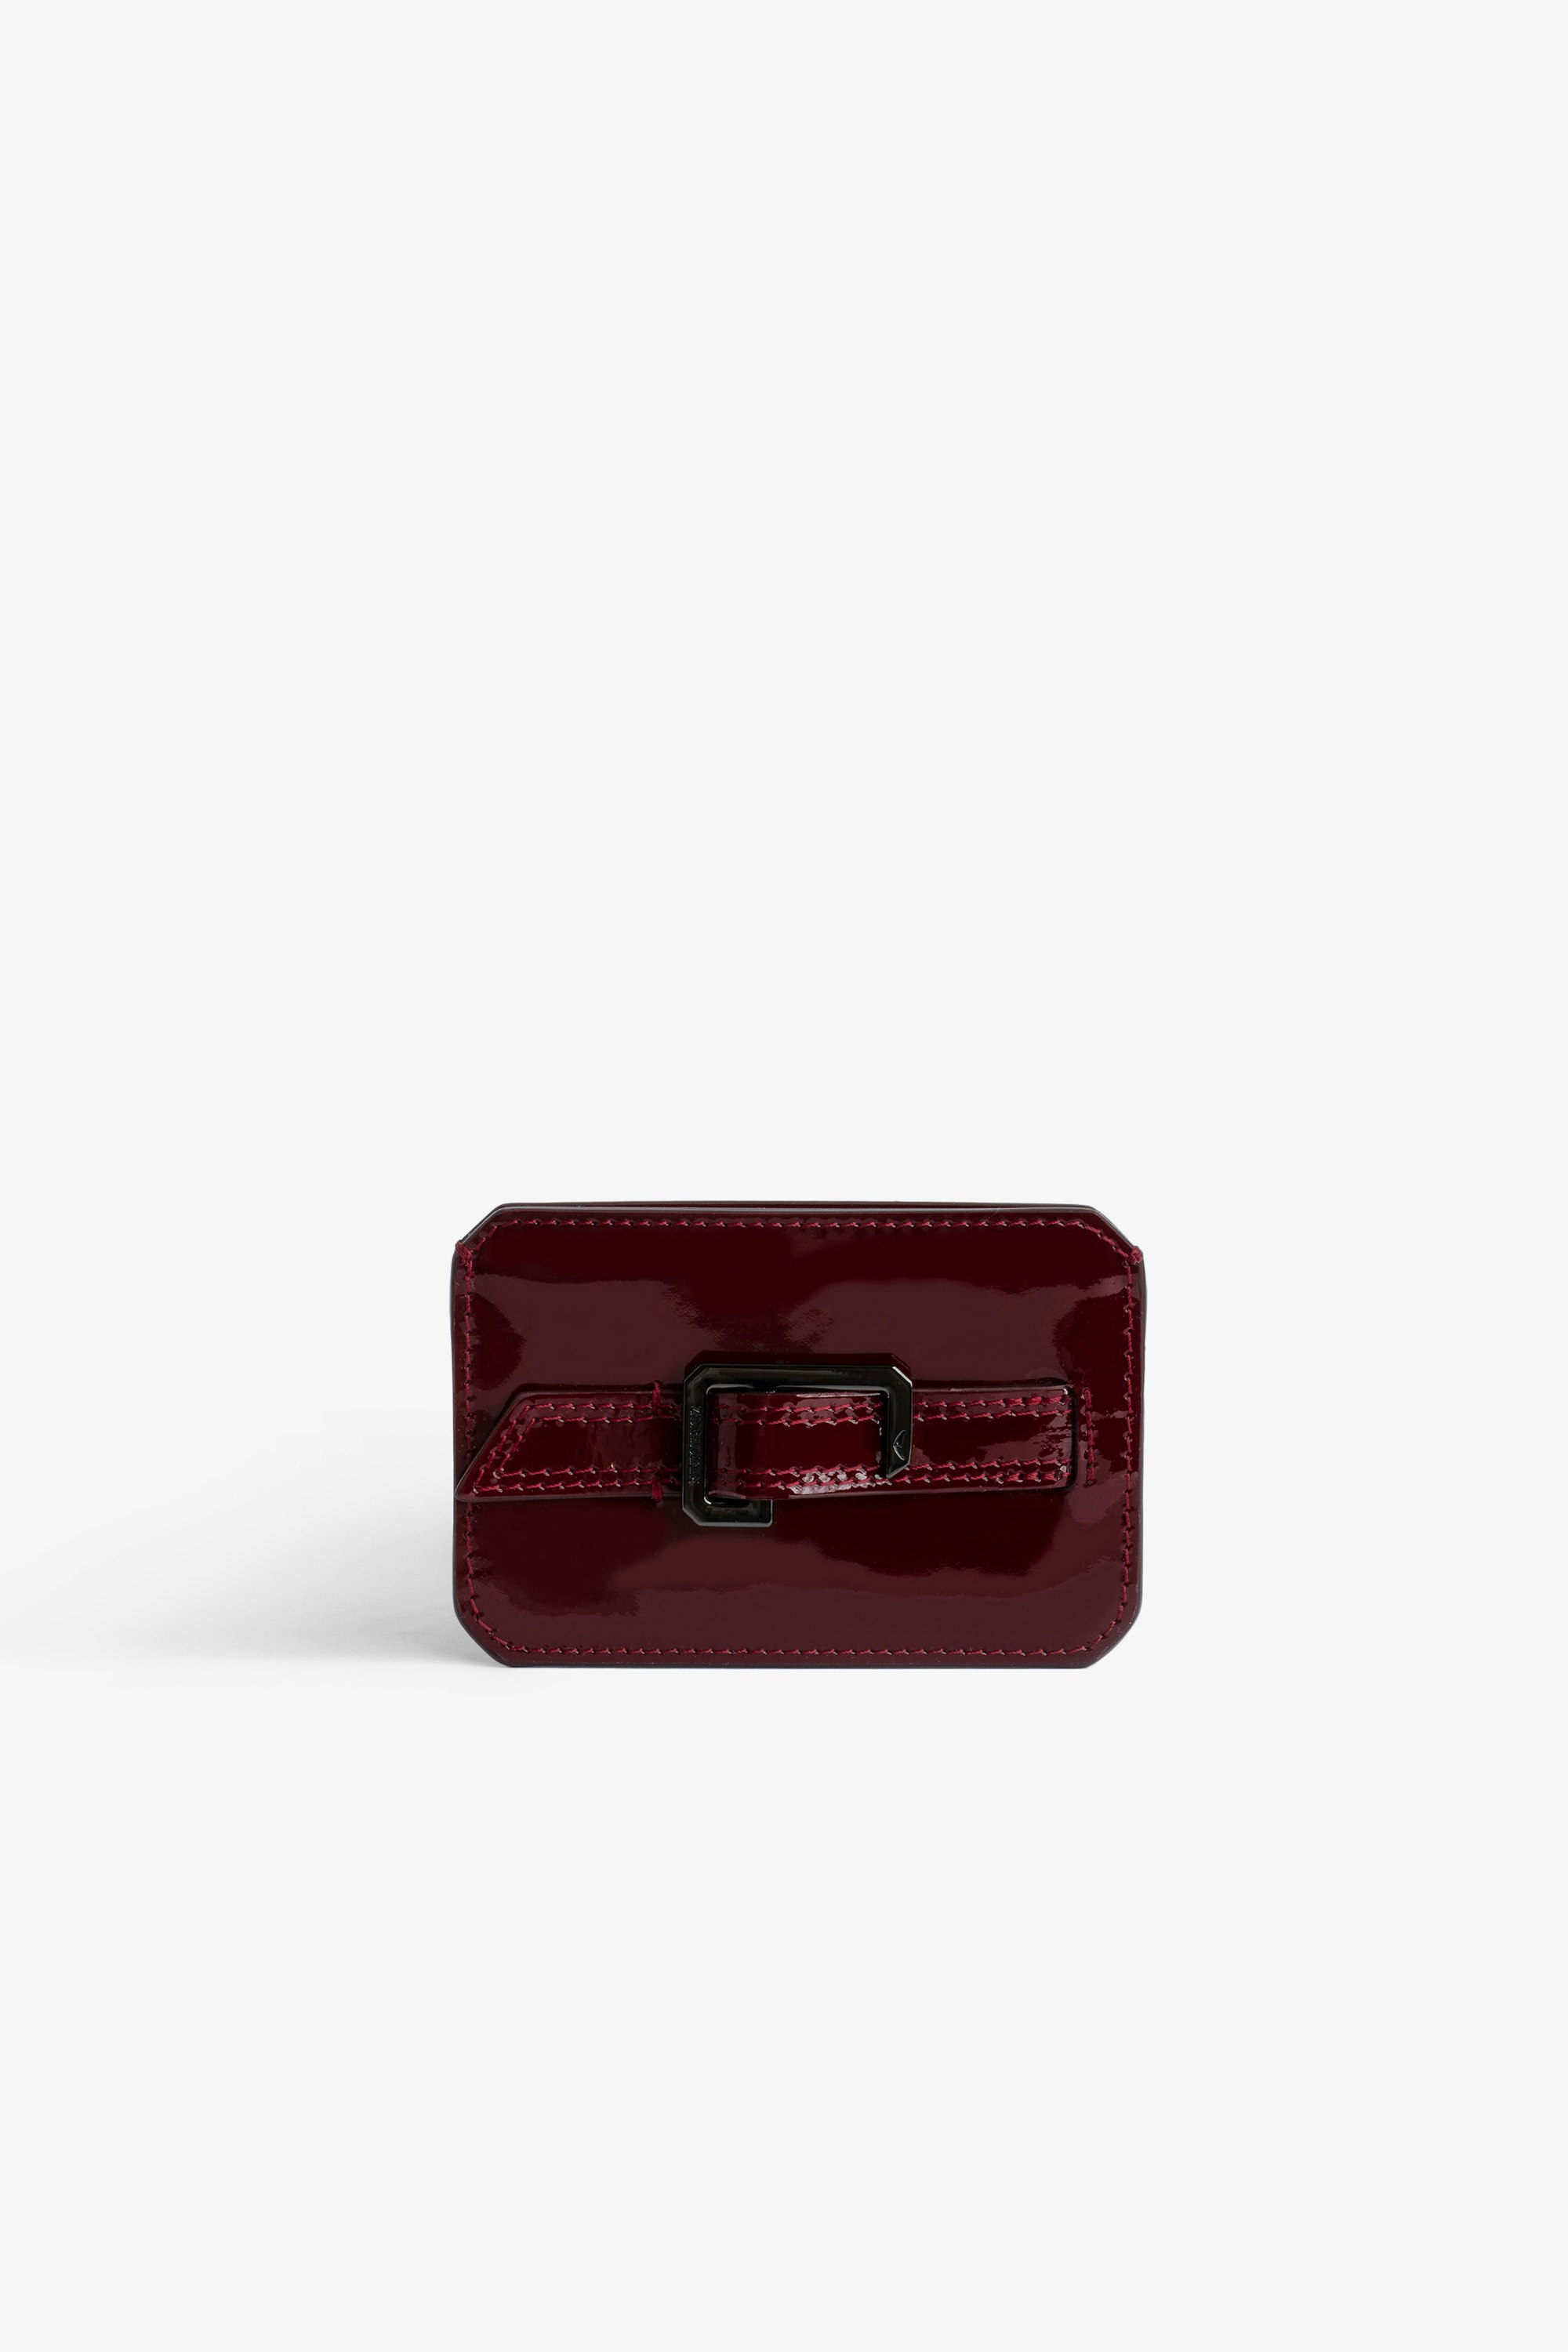 Le Cecilia Pass 財布 Women’s burgundy patent leather card holder 